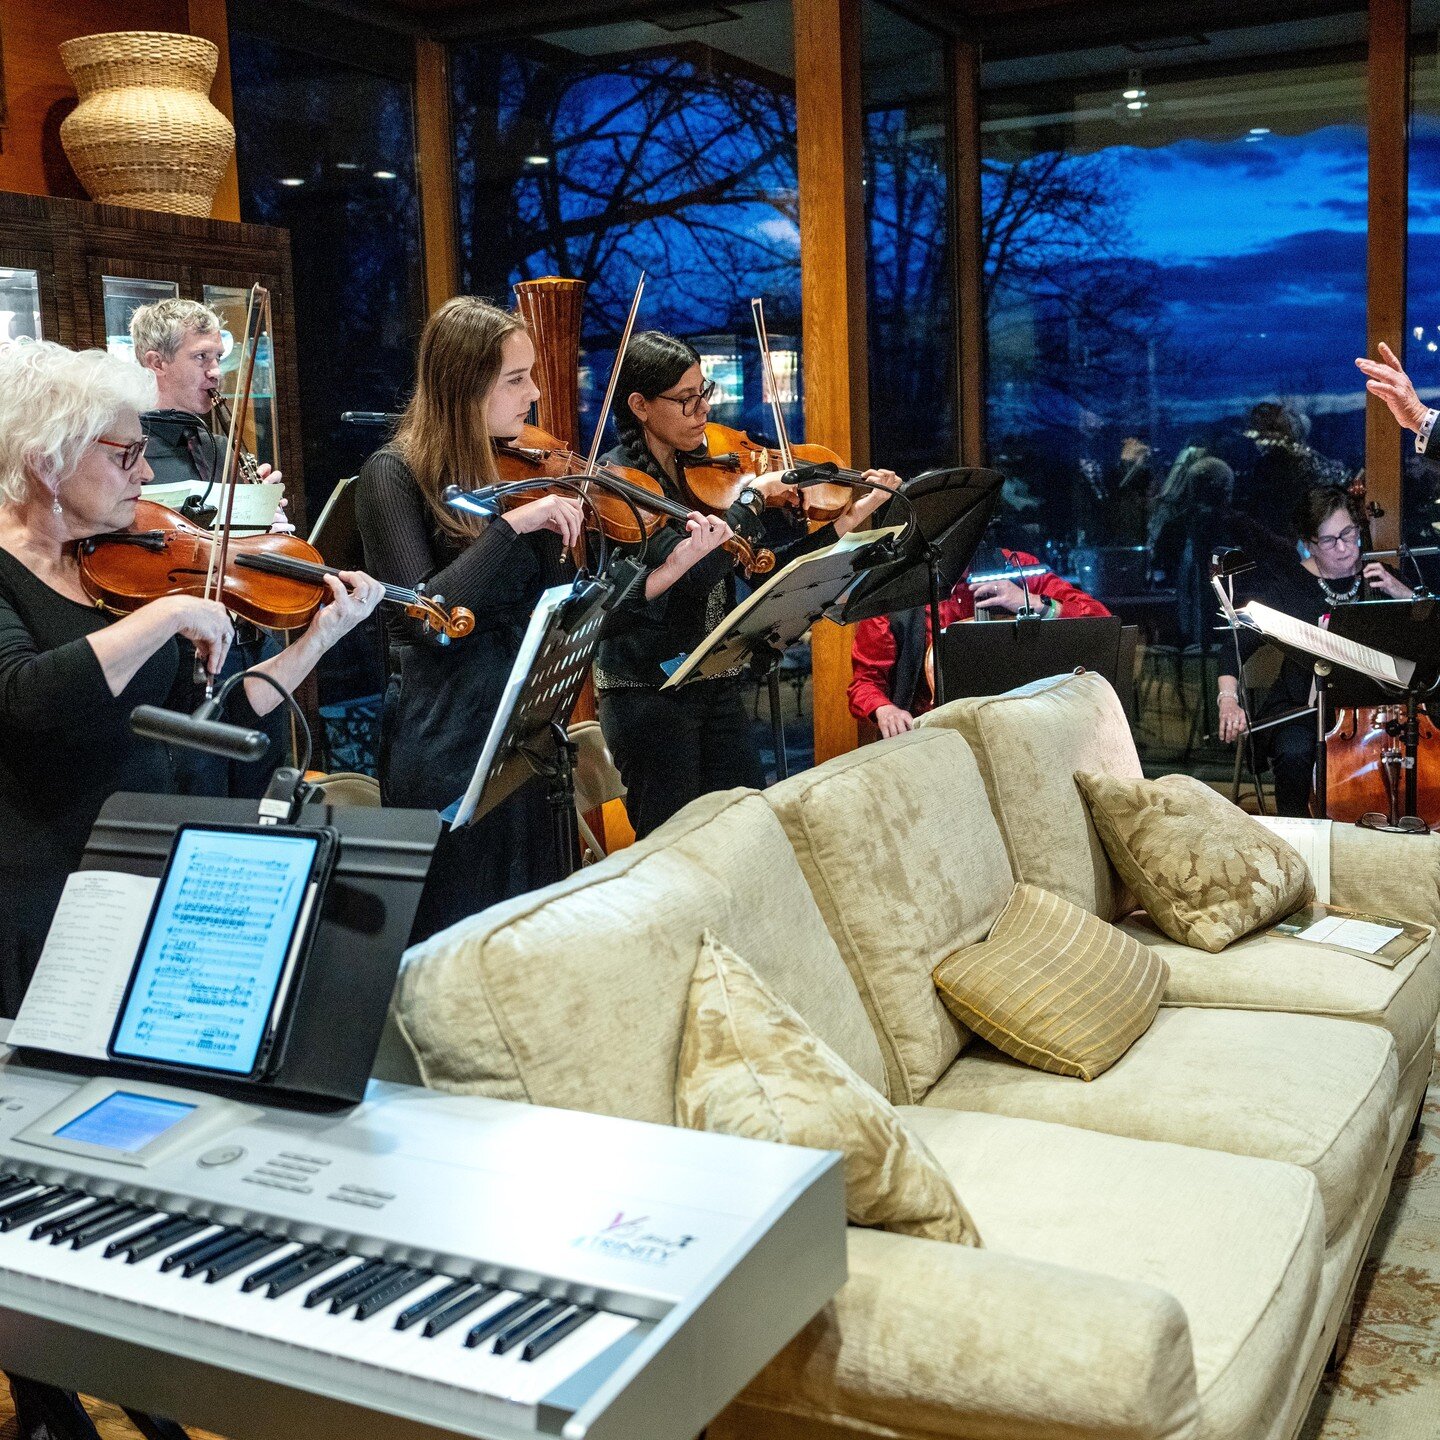 We are still soaking in the magic from our intimate house concert... Musique M&eacute;nage at the Governor's Western Residence was a huge success under the direction of BRO Music Director, Milton Crotts. To our generous participants, supporters, and 